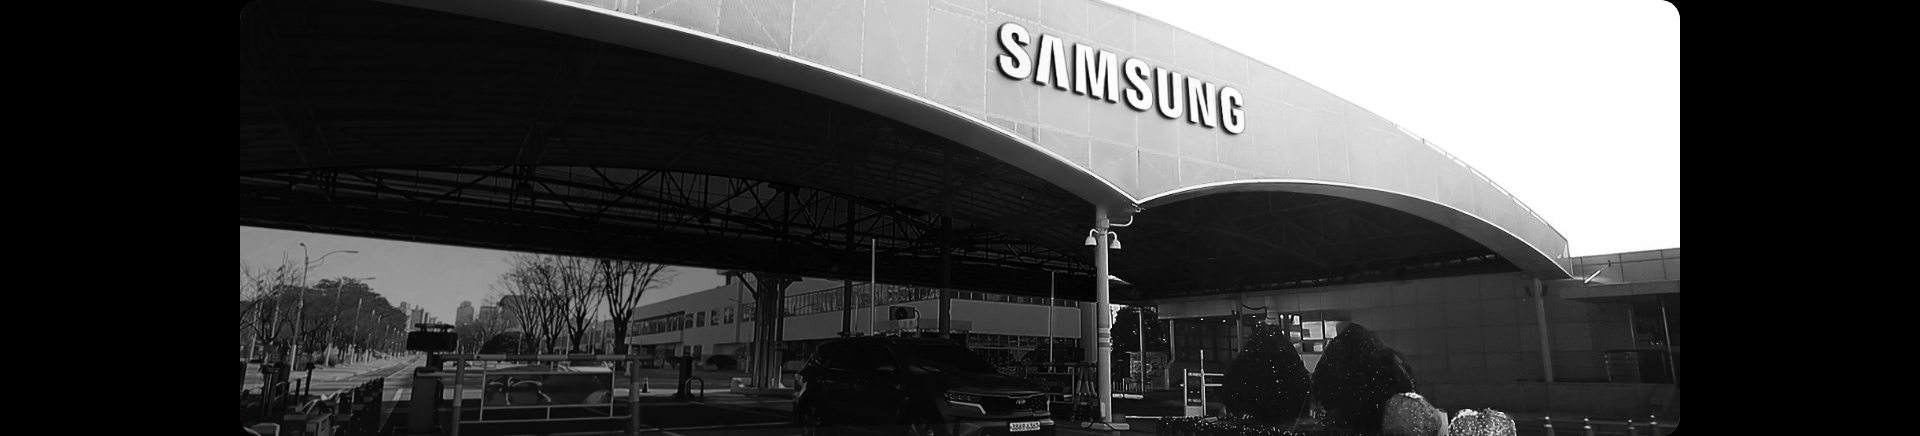 There's Samsung lettermark on Suwon Digital Campus Central Gate.